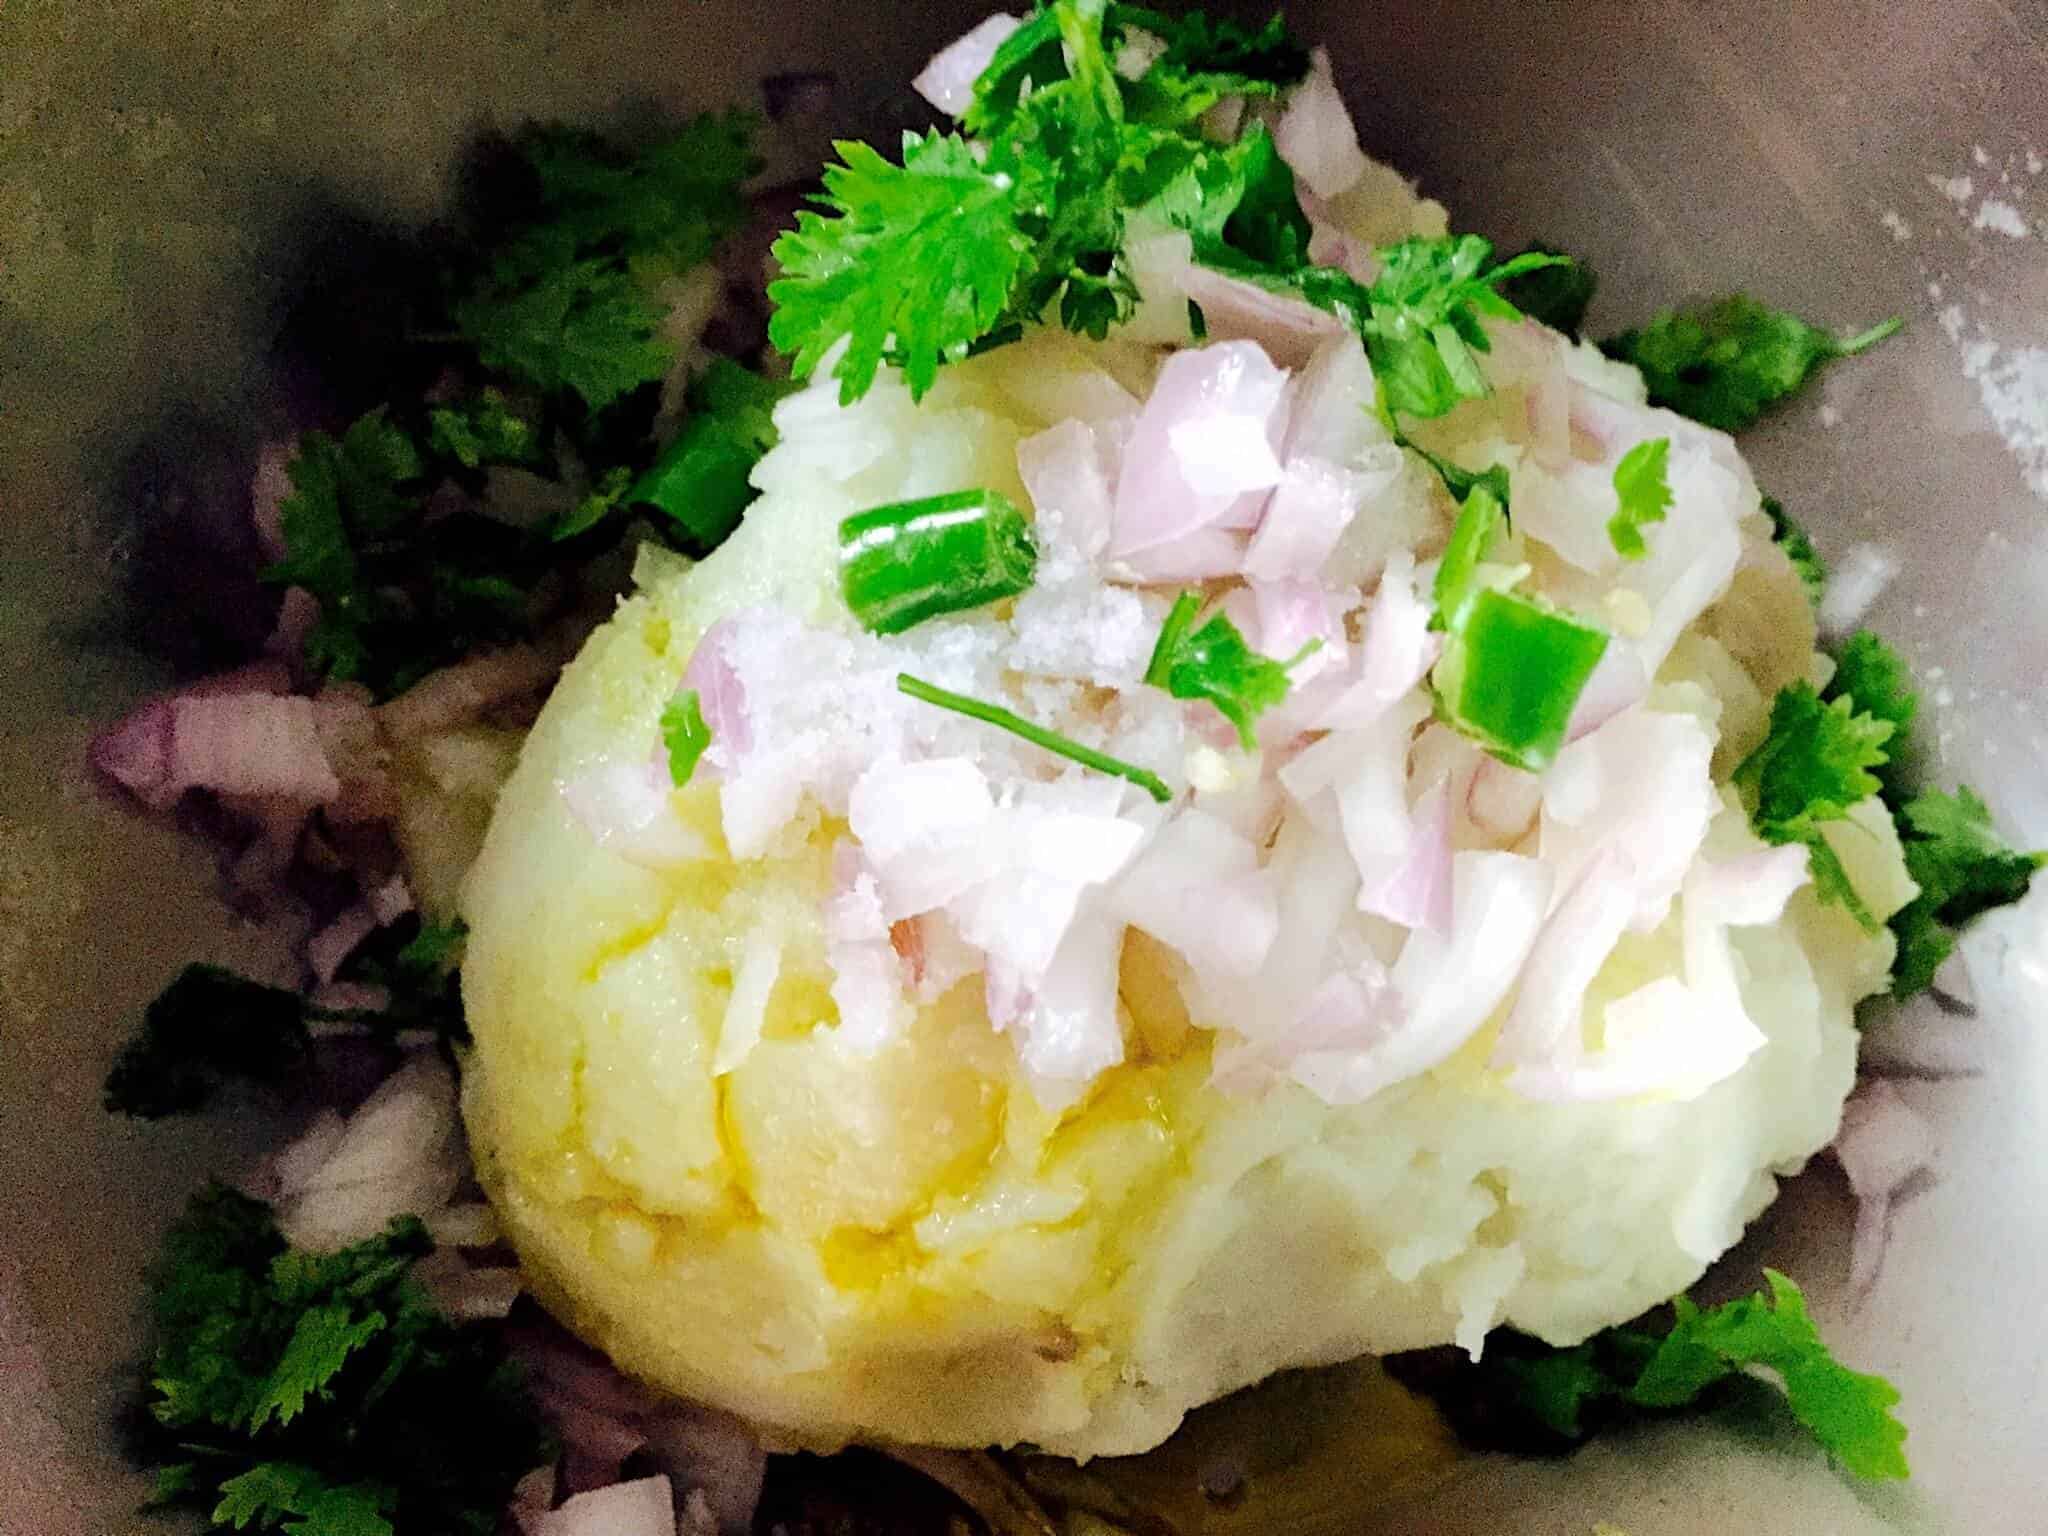 A large scoop of mashed potatoes, yellow on the left with mustard oil. Fresh coriander leaves and slices of green chili and onion and a scatter of salt are heaped up on the potoatoes. Some coriander leaves and onions scattered around